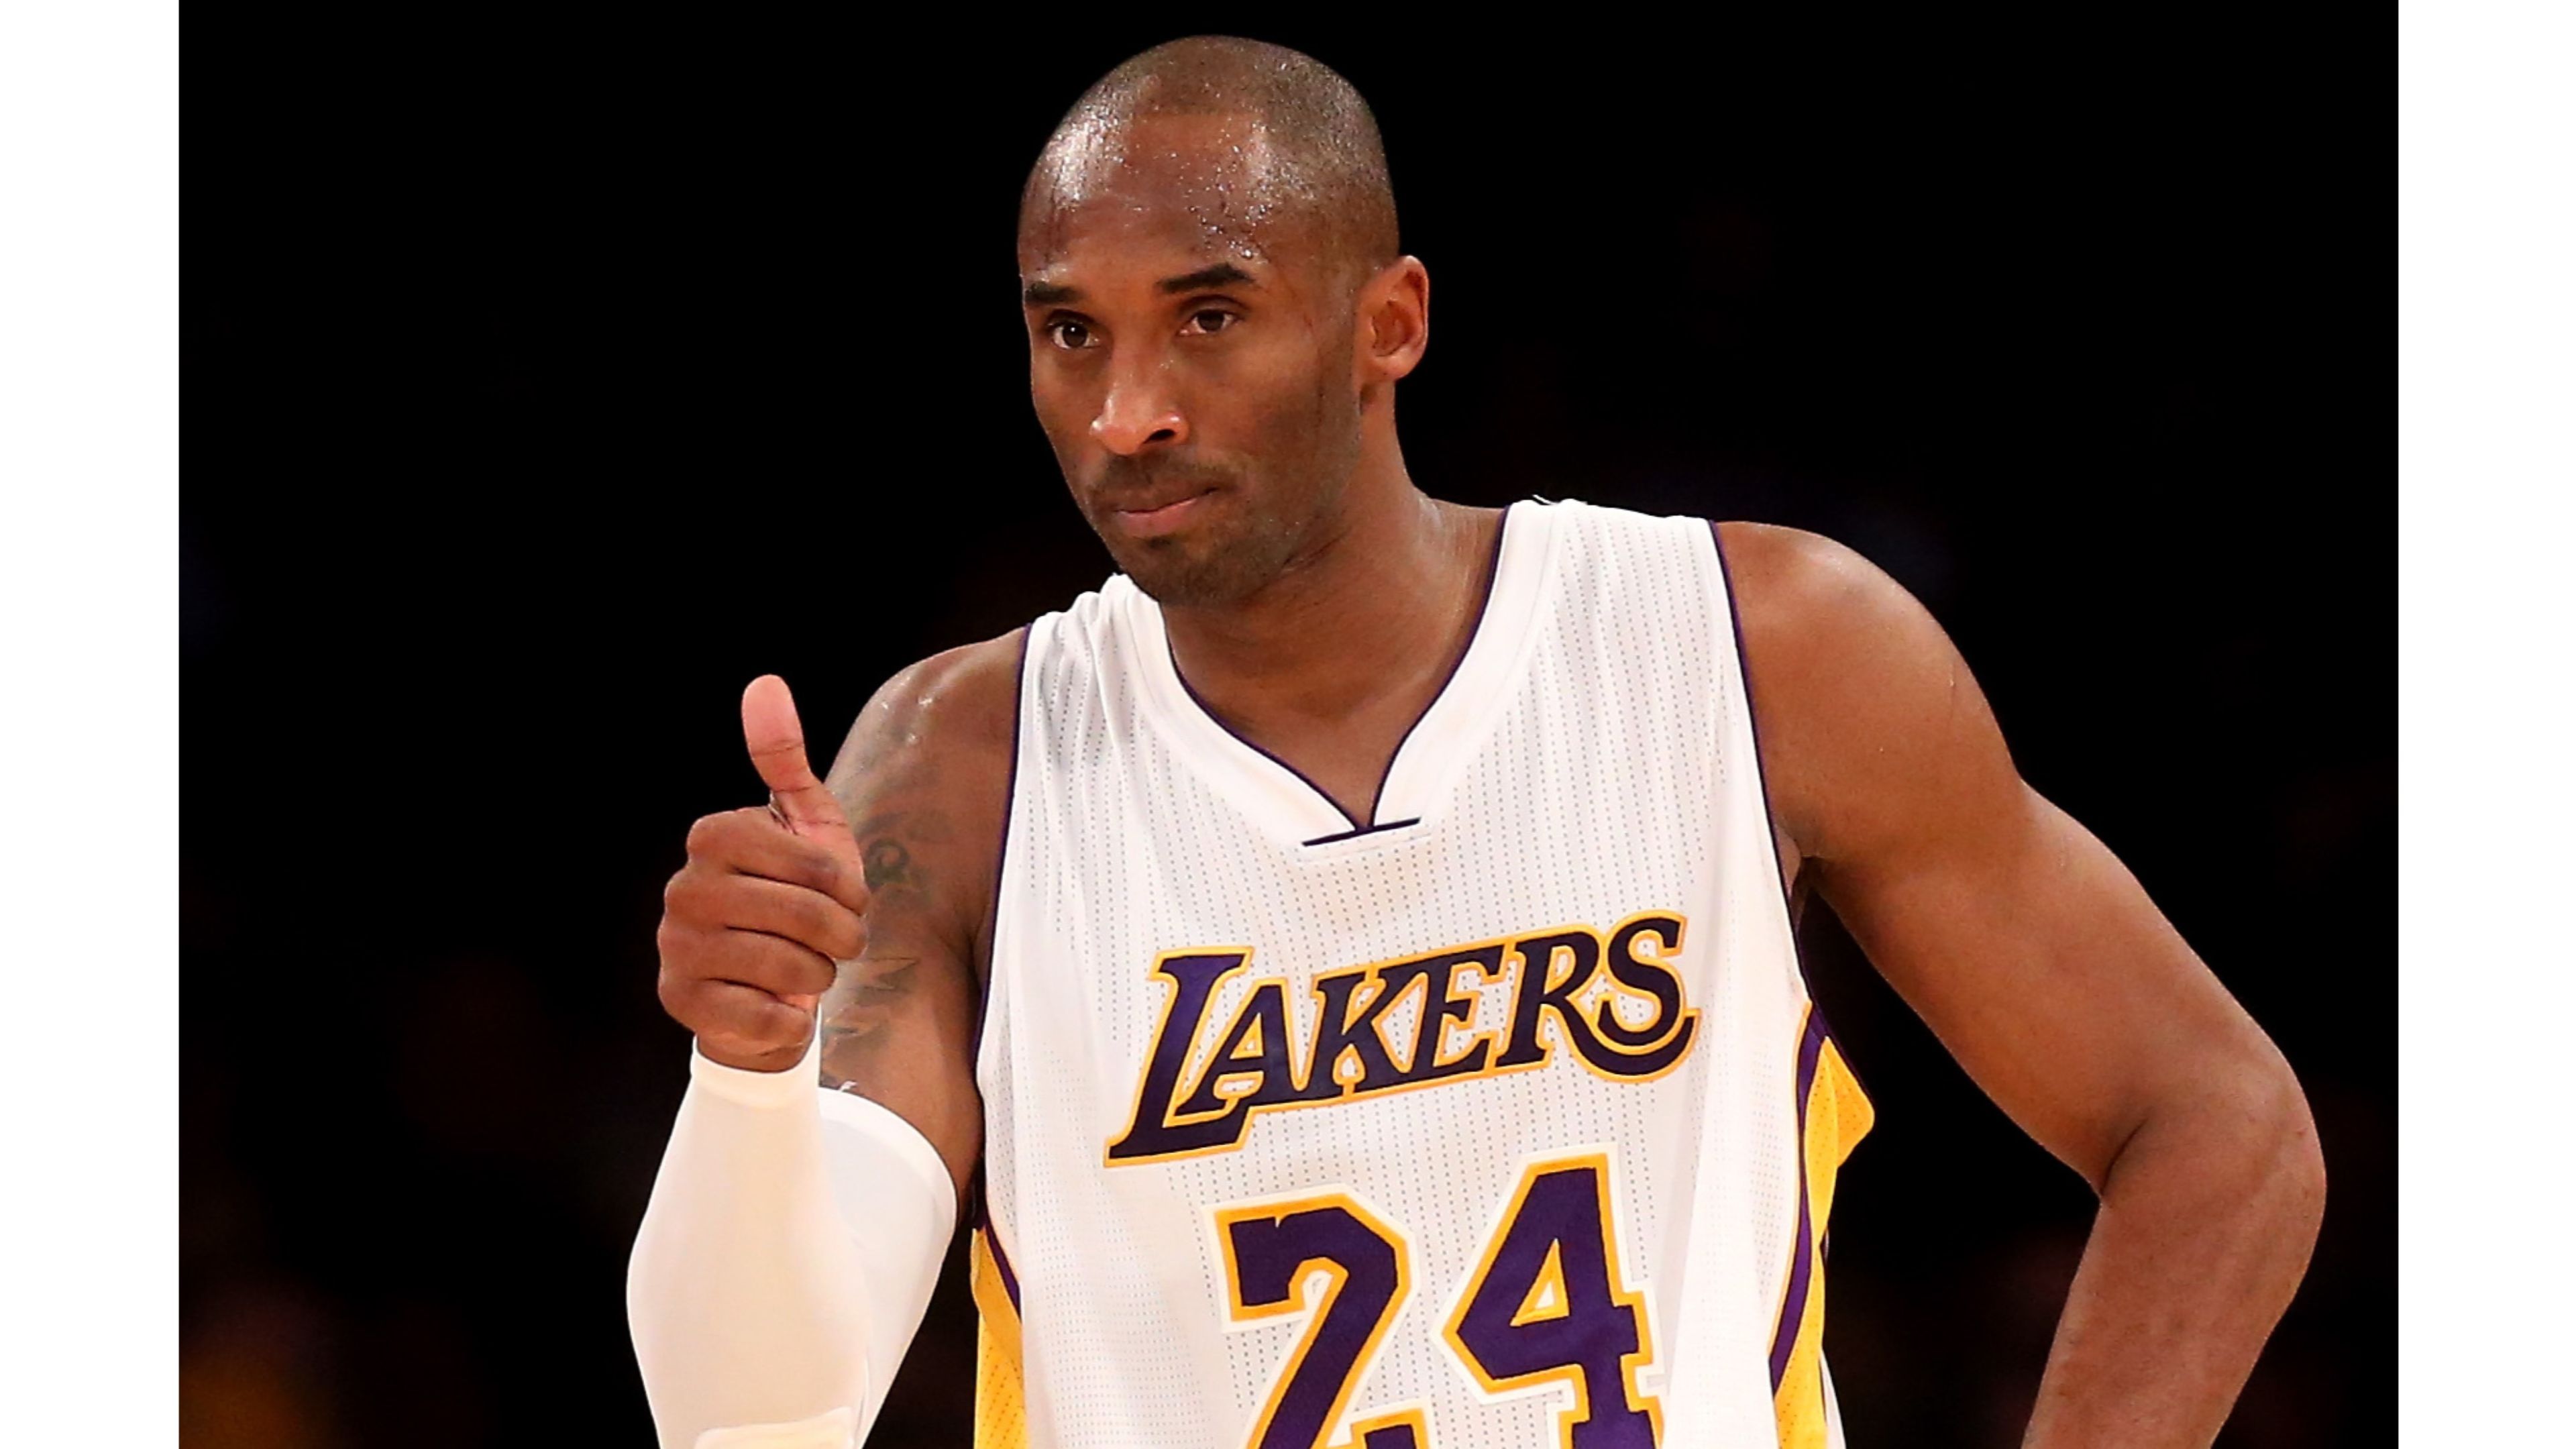 Kobe 4K wallpaper for your desktop or mobile screen free and easy to download